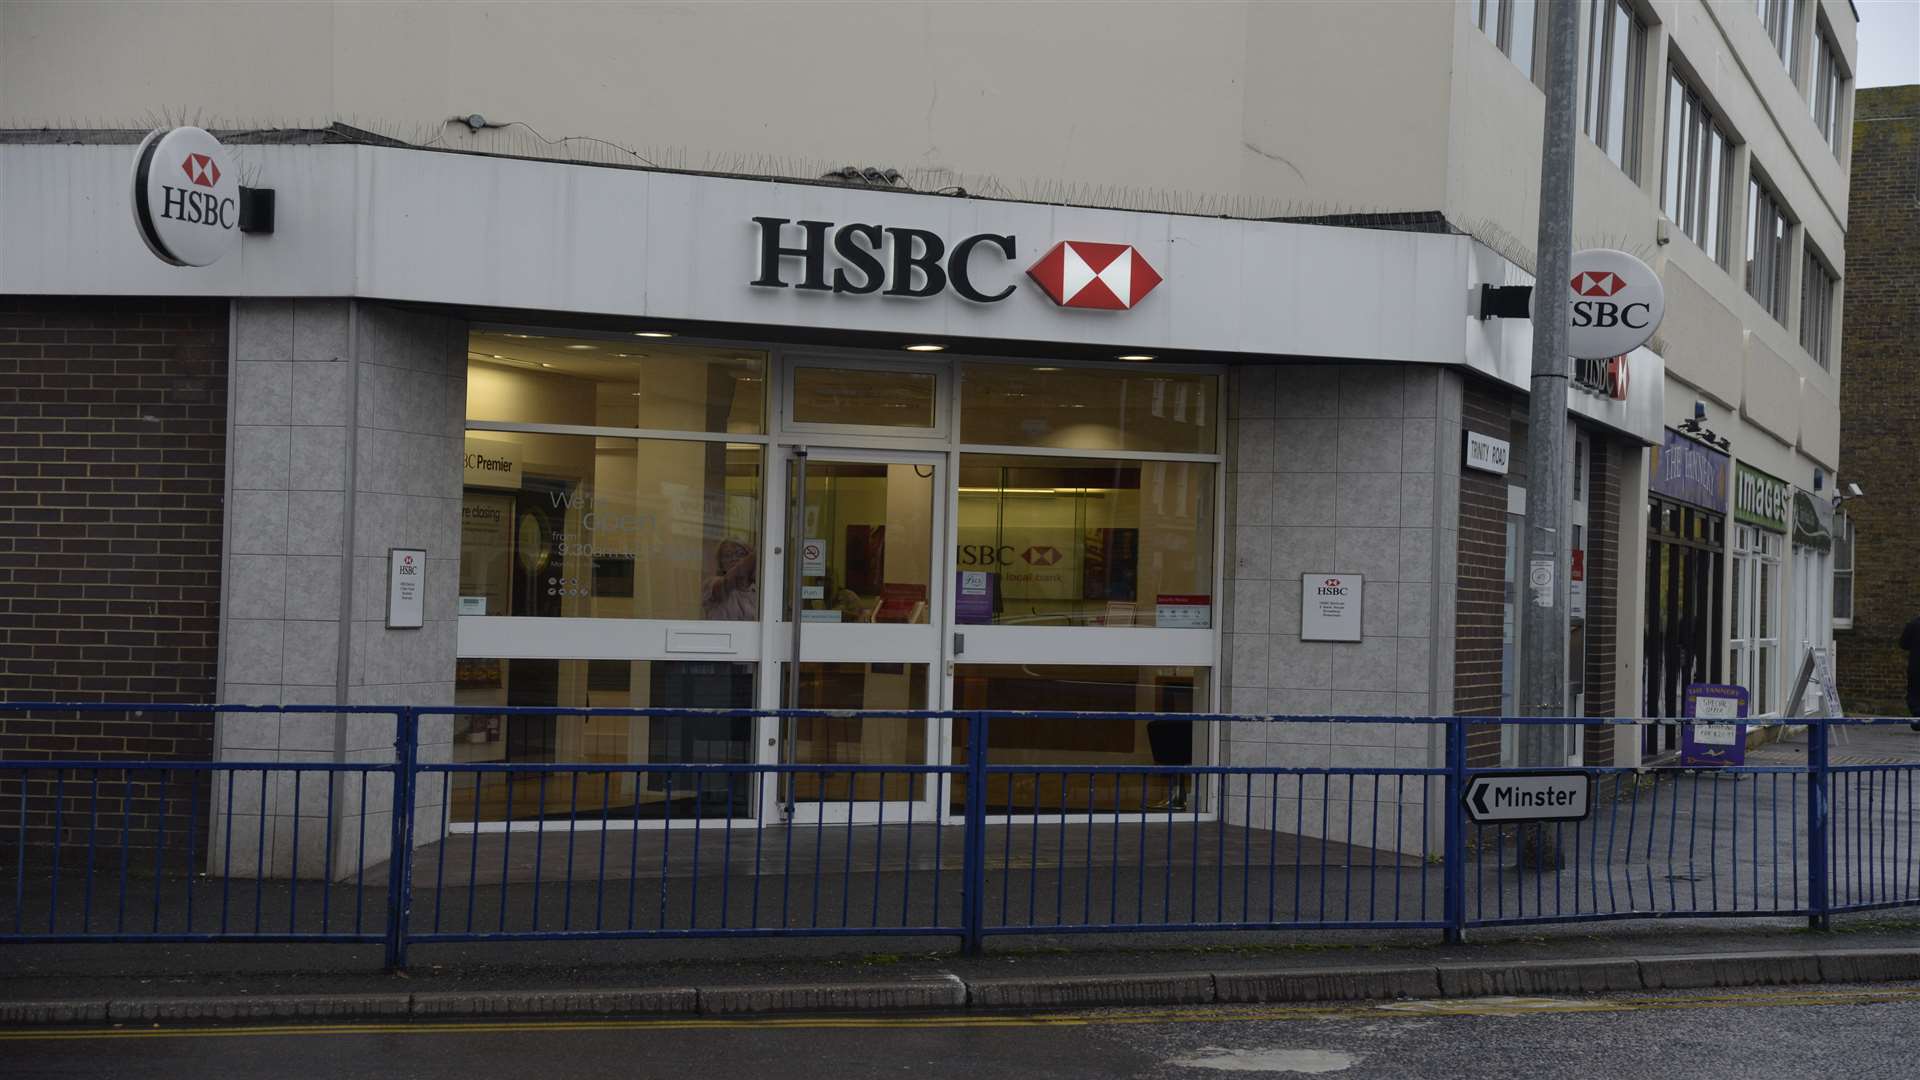 The HSBC in Sheerness